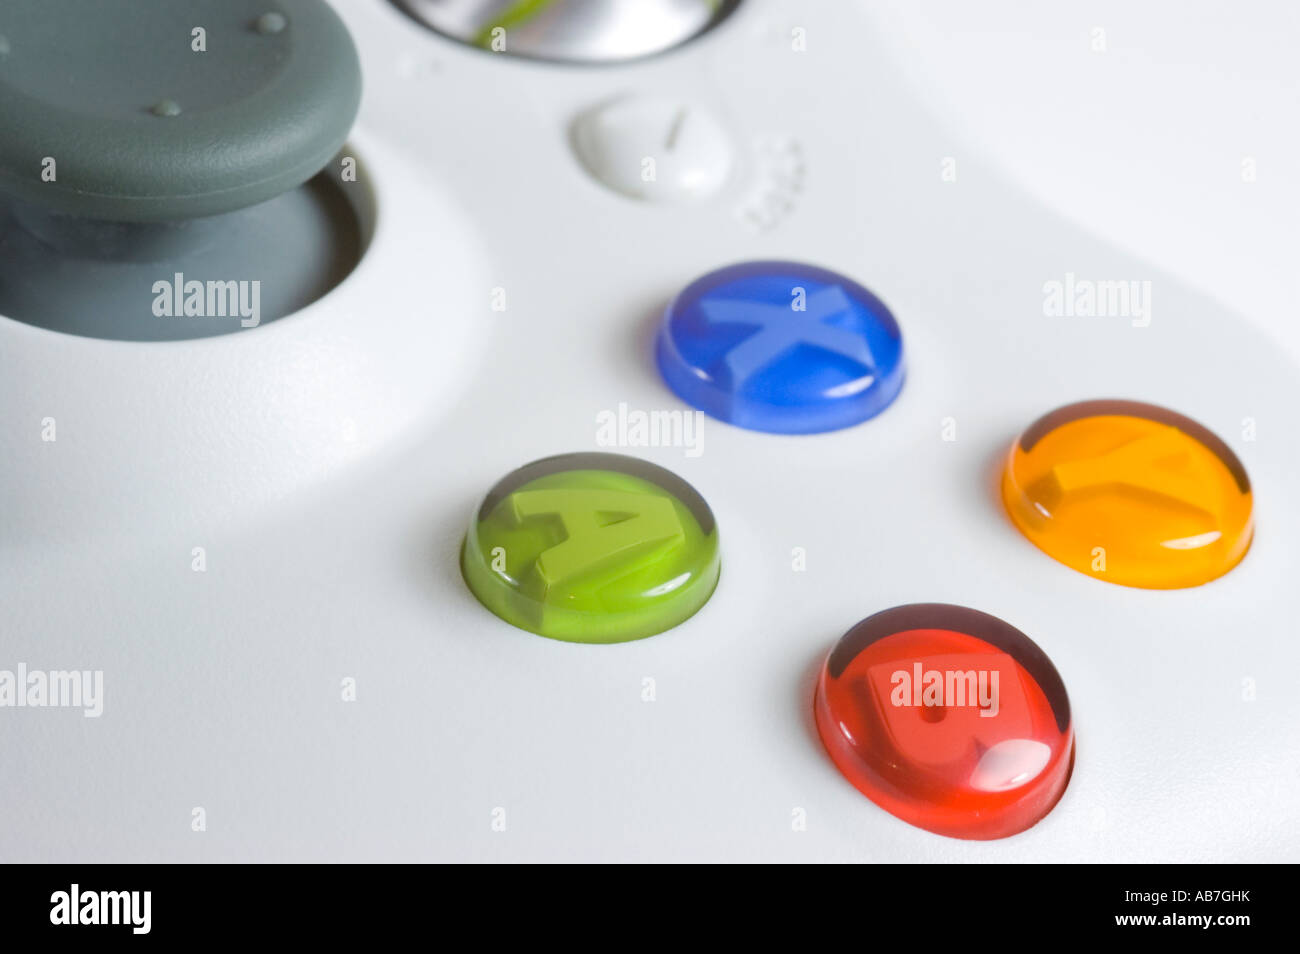 Close up of a Microsoft xbox 360 game console controller Stock Photo - Alamy